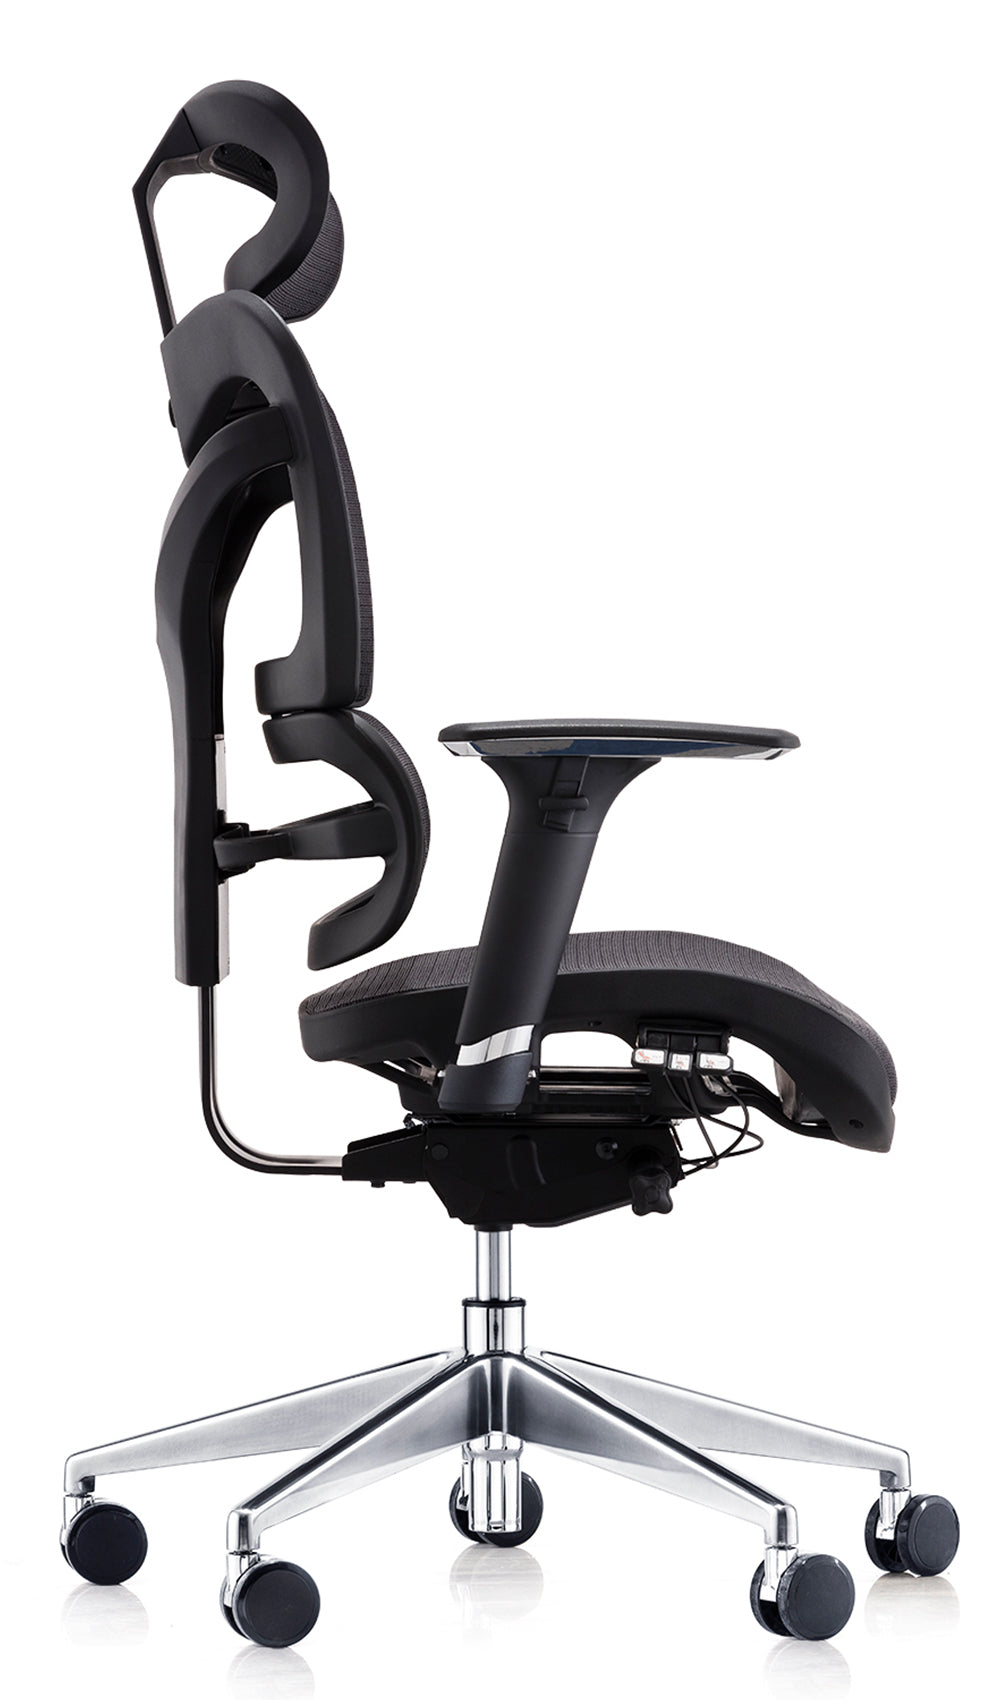 10 Best Recommendations for an Office Chair for Hip Arthritis